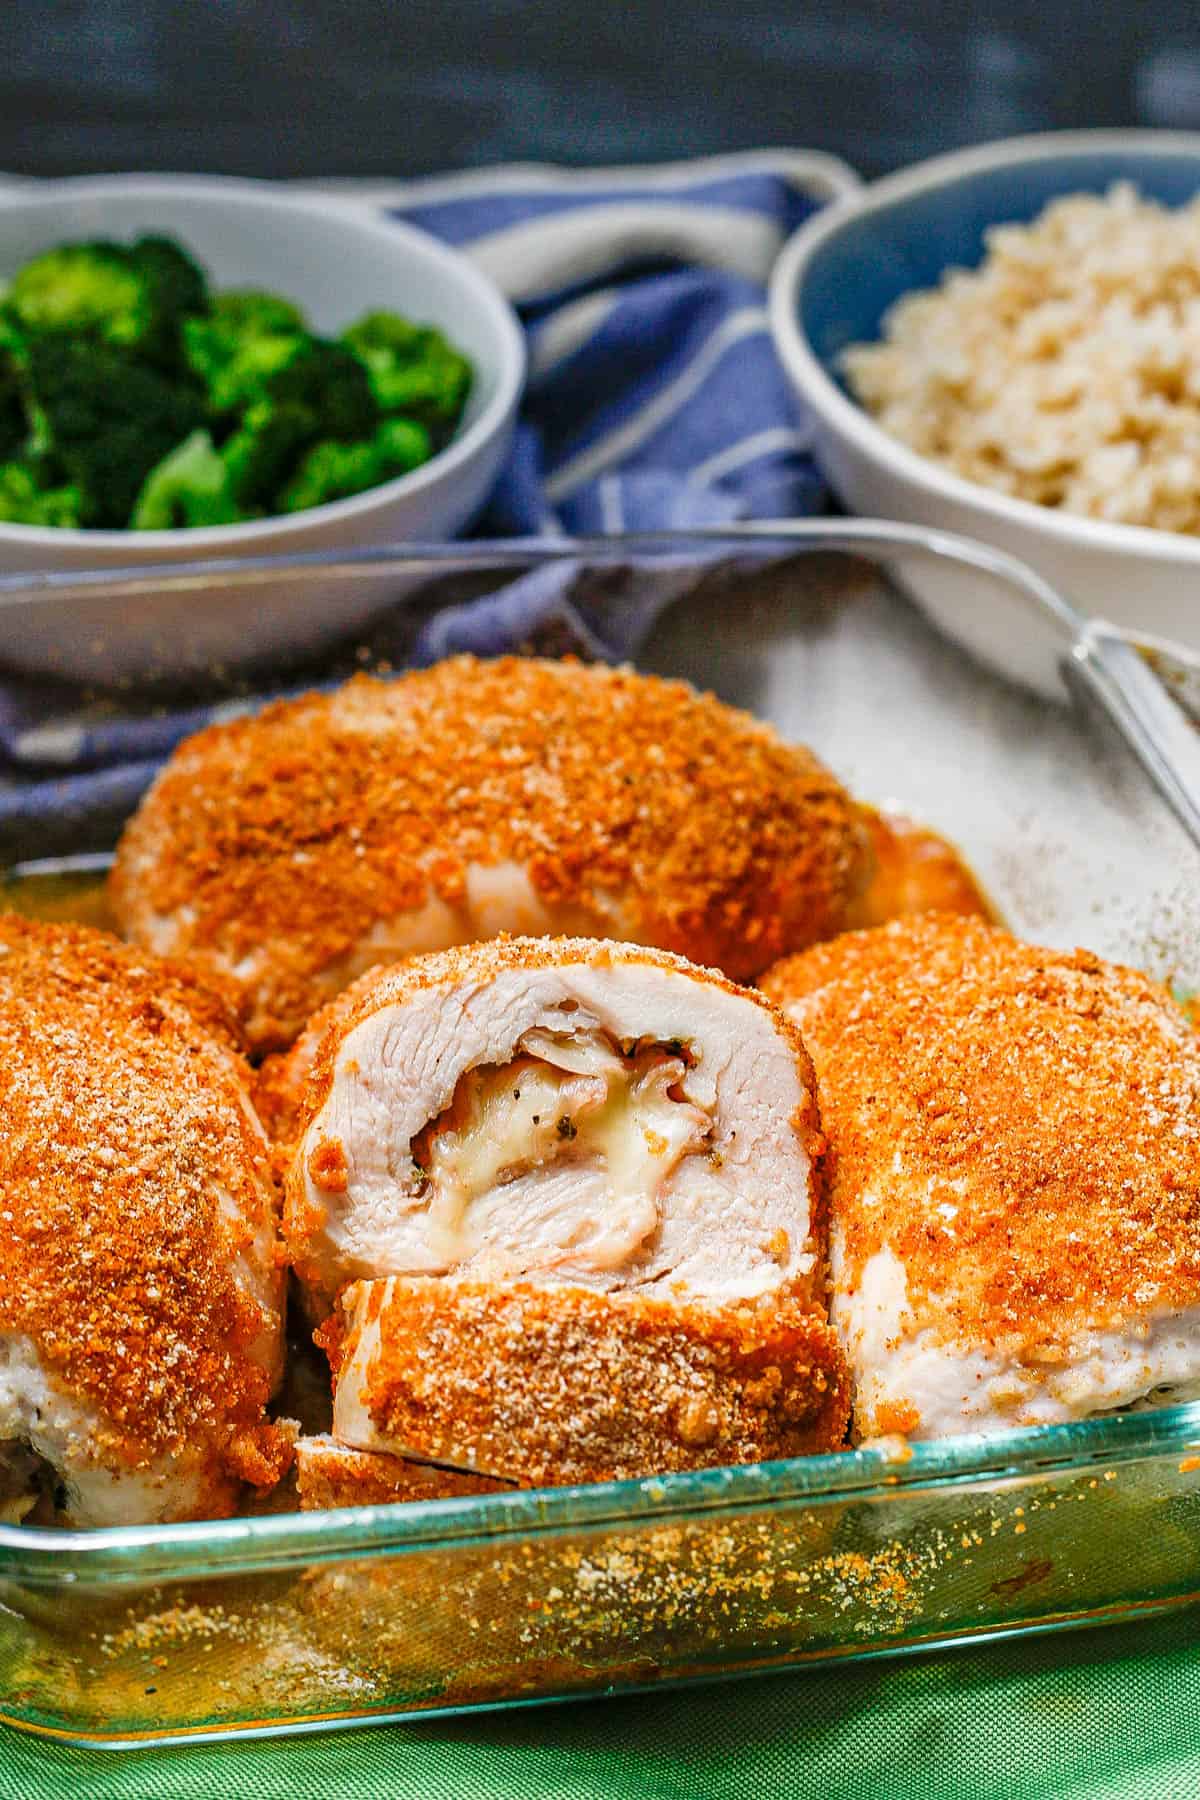 A glass casserole dish of baked chicken cordon bleu with bowls of steamed broccoli and steamed brown rice in the background.